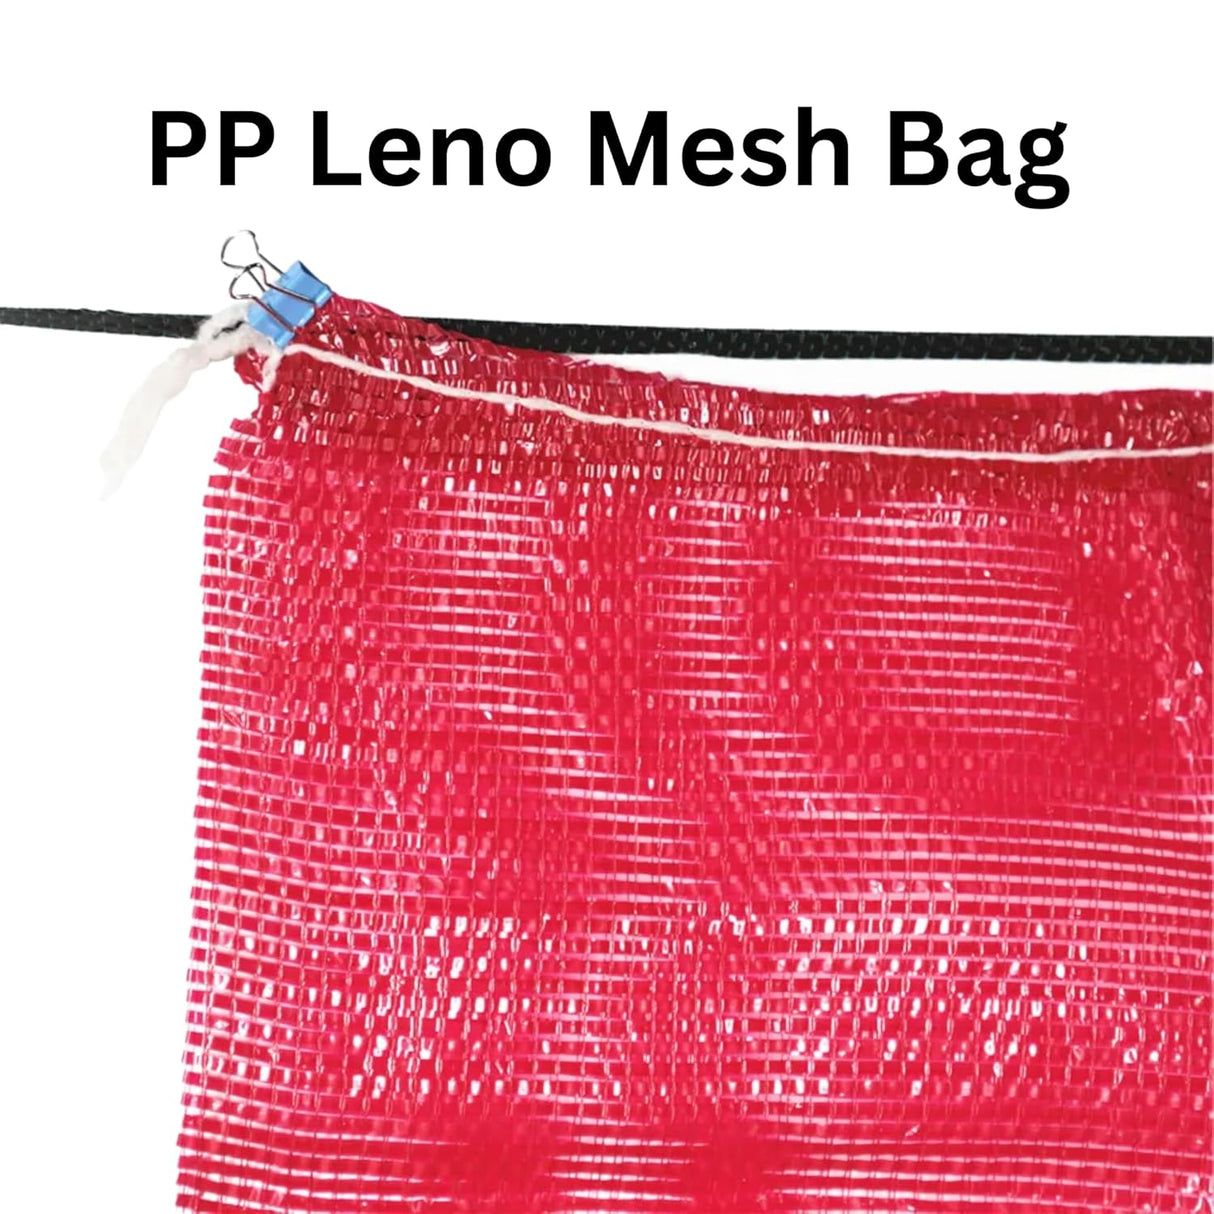 SINGHAL Leno Mesh Storage Produce Bags Reusable for Vegetable Storage Bags Onion Storage Washable Net Bags (18x20 Inch - White, 25)